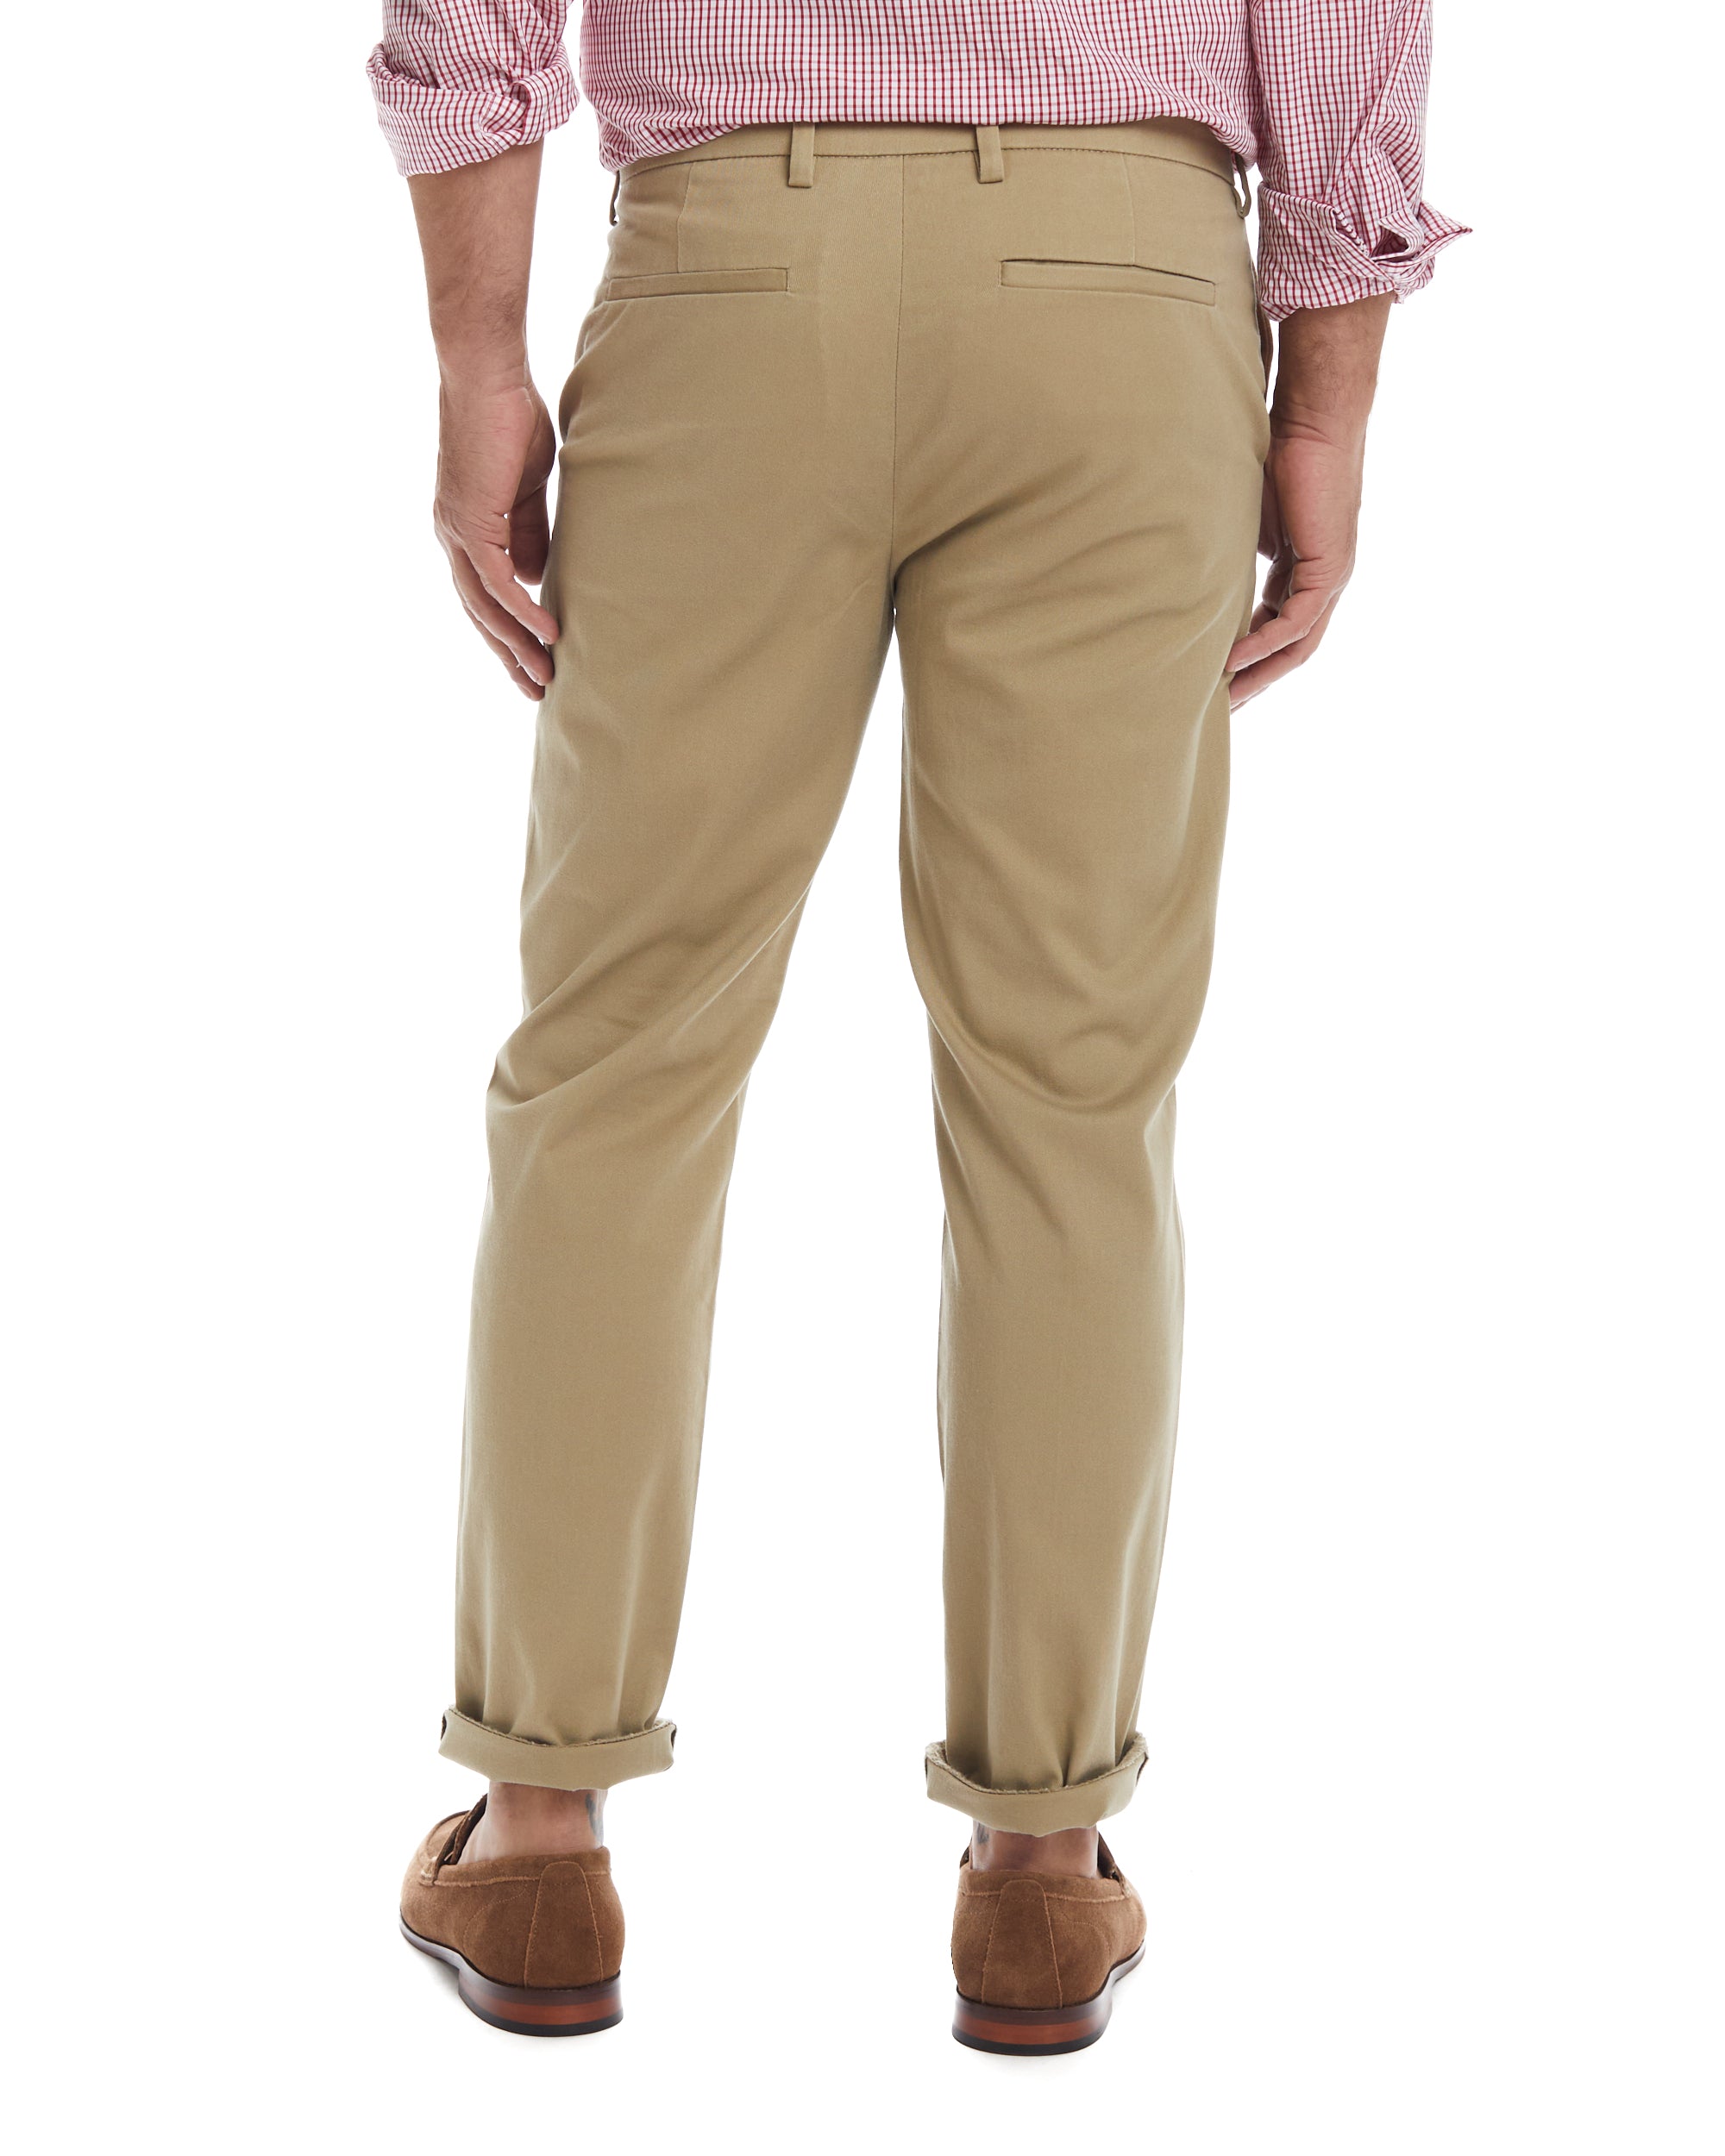 Flat Front 'Fordham' Easy-Cary Chino Twill Pant with Magnetic Closures - Khaki